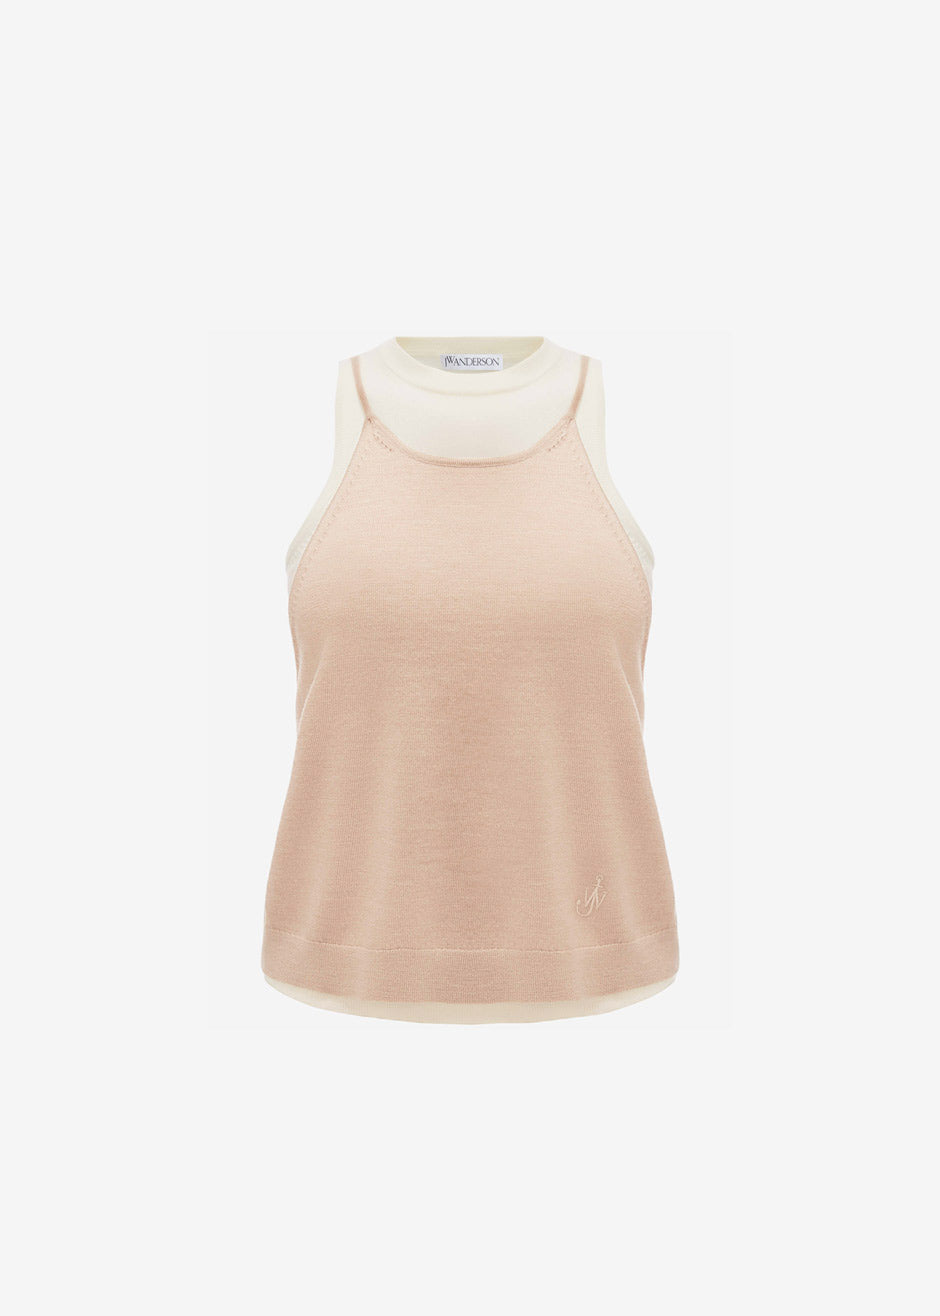 JW Anderson Layered Tank Top - White/Beige - 10